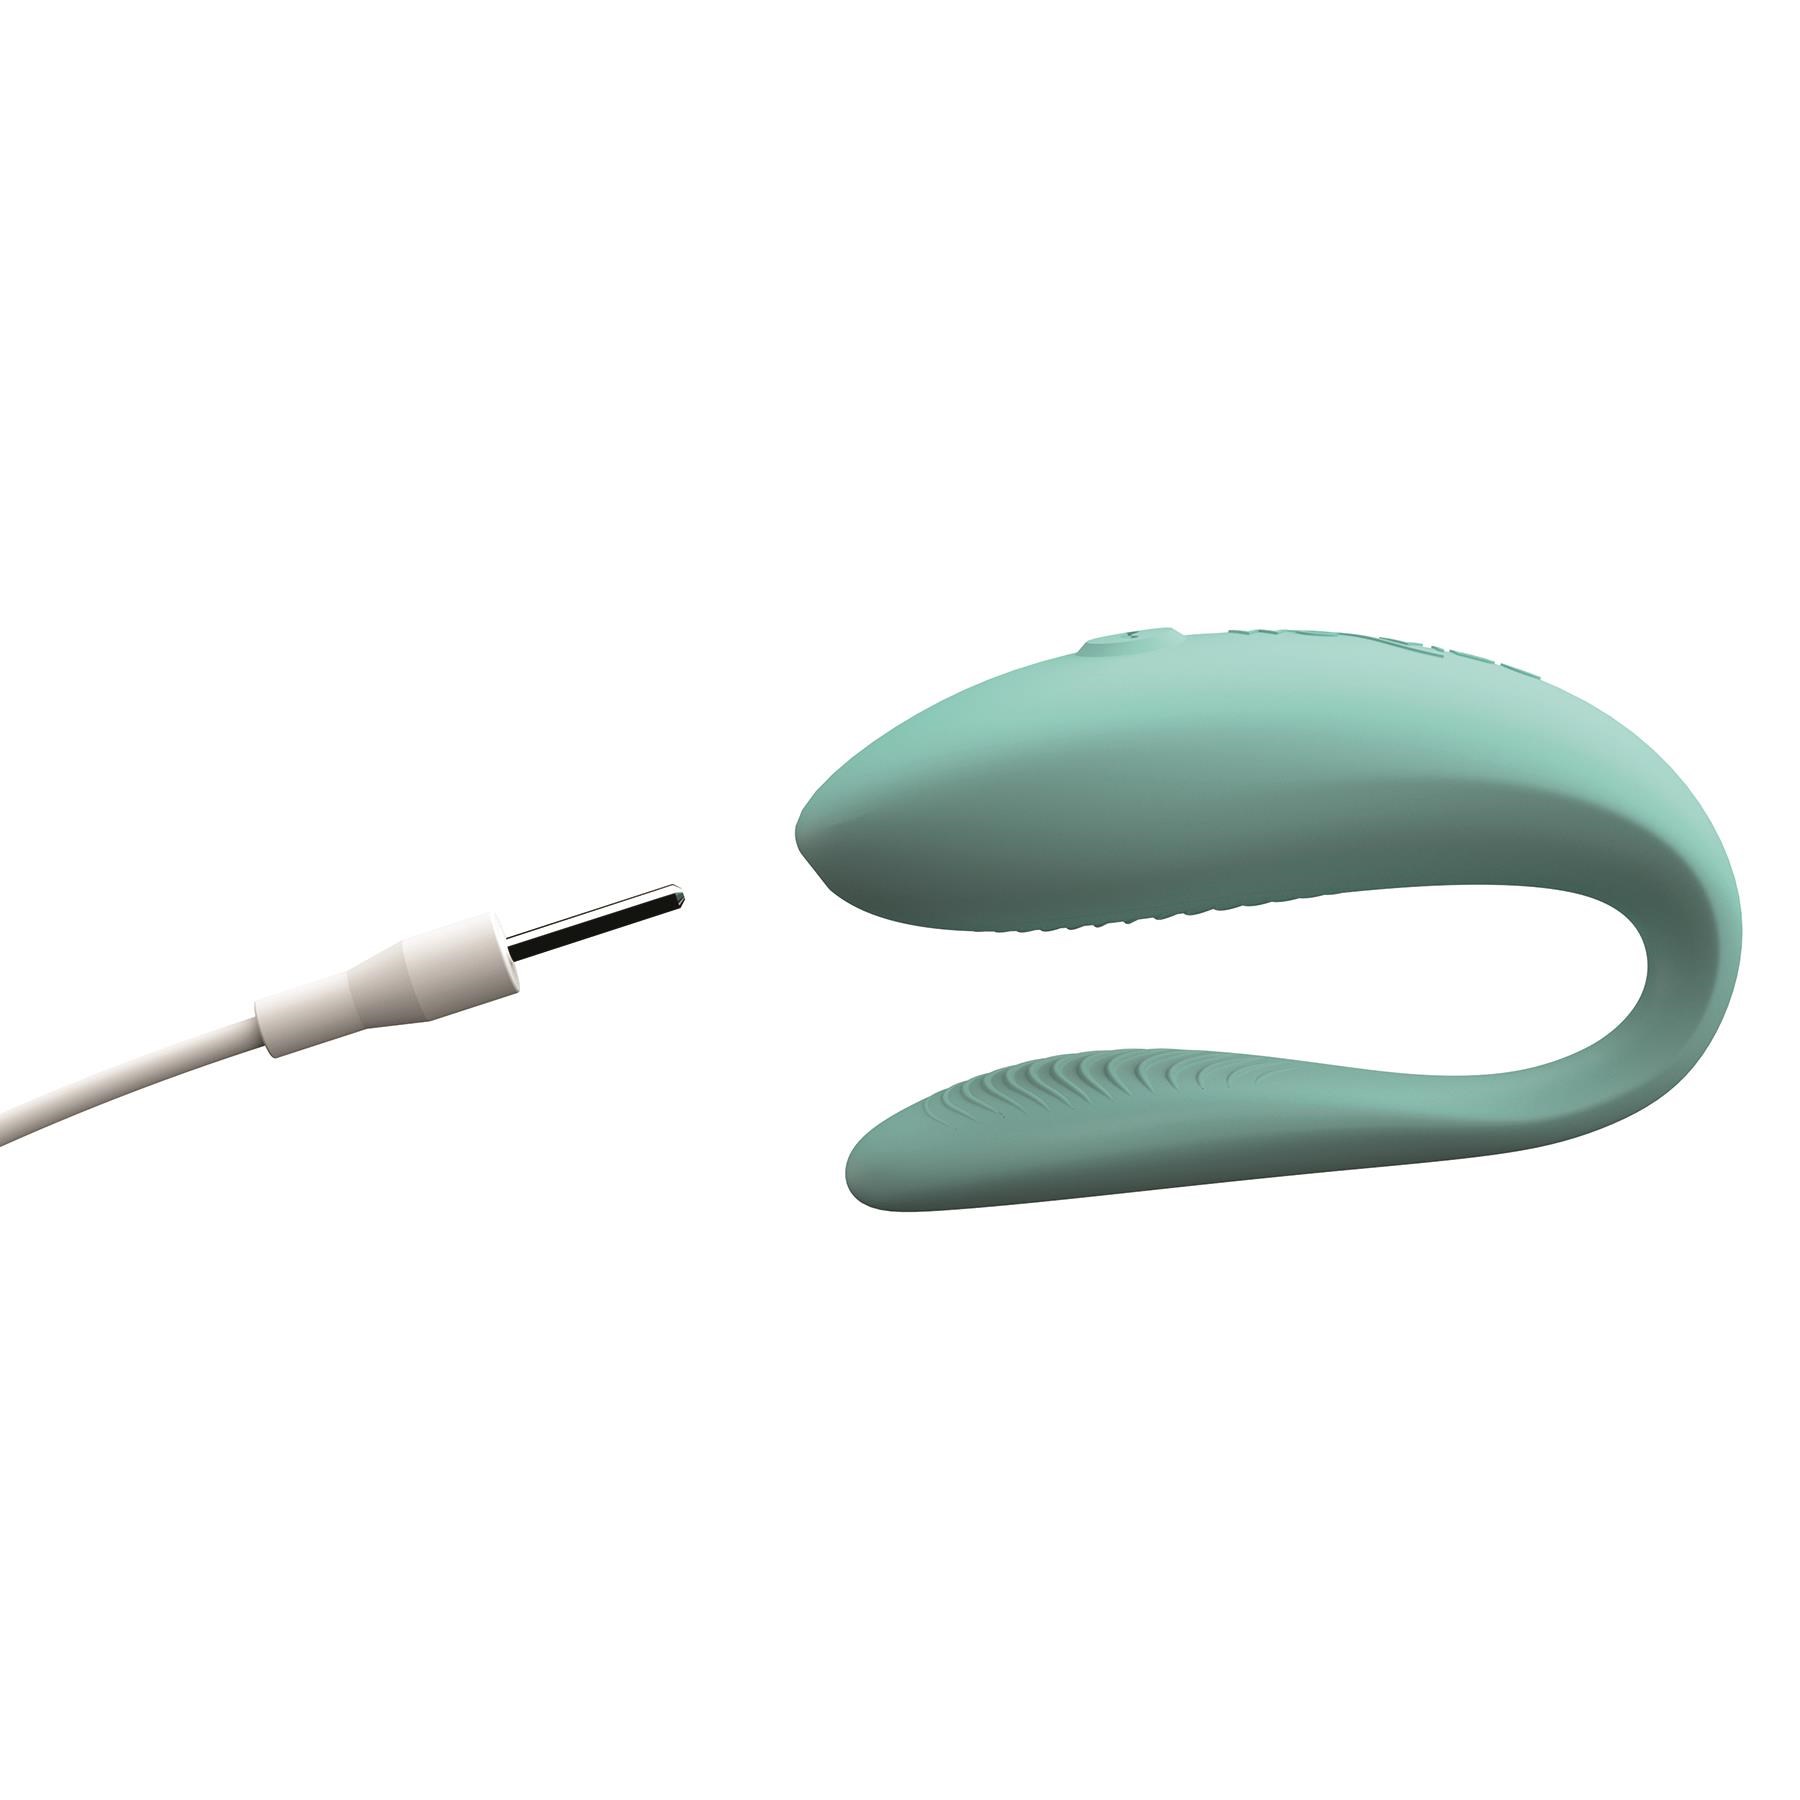 We-Vibe Sync Lite Couples Massager - Showing Where Charging Cable is Placed